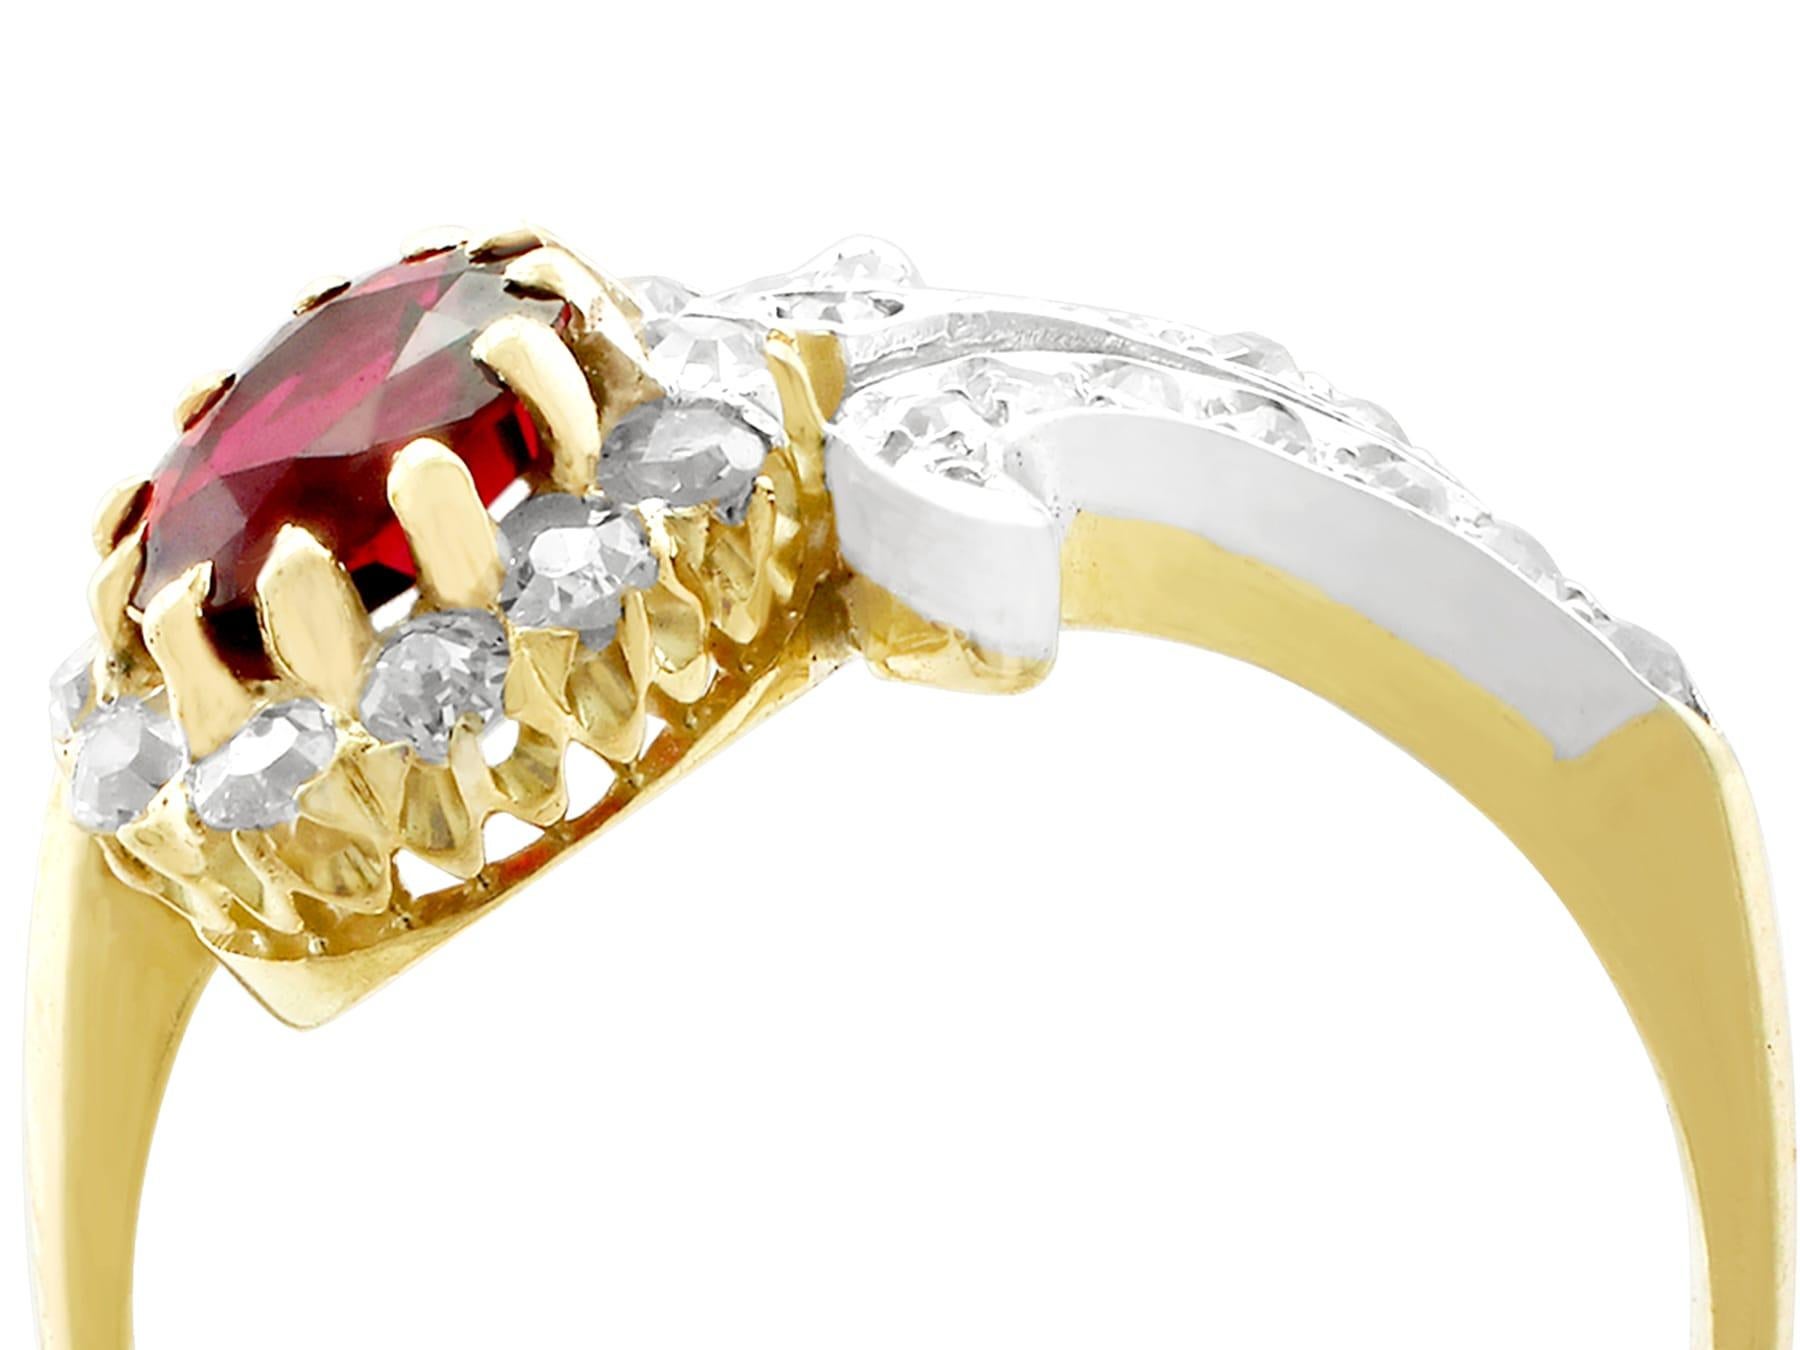 An impressive antique 0.95 carat ruby and 0.83 carat diamond, 18 karat yellow and white gold twist ring; part of our diverse antique jewelry collections.

This fine and impressive antique ruby and diamond ring has been crafted in 18k yellow gold